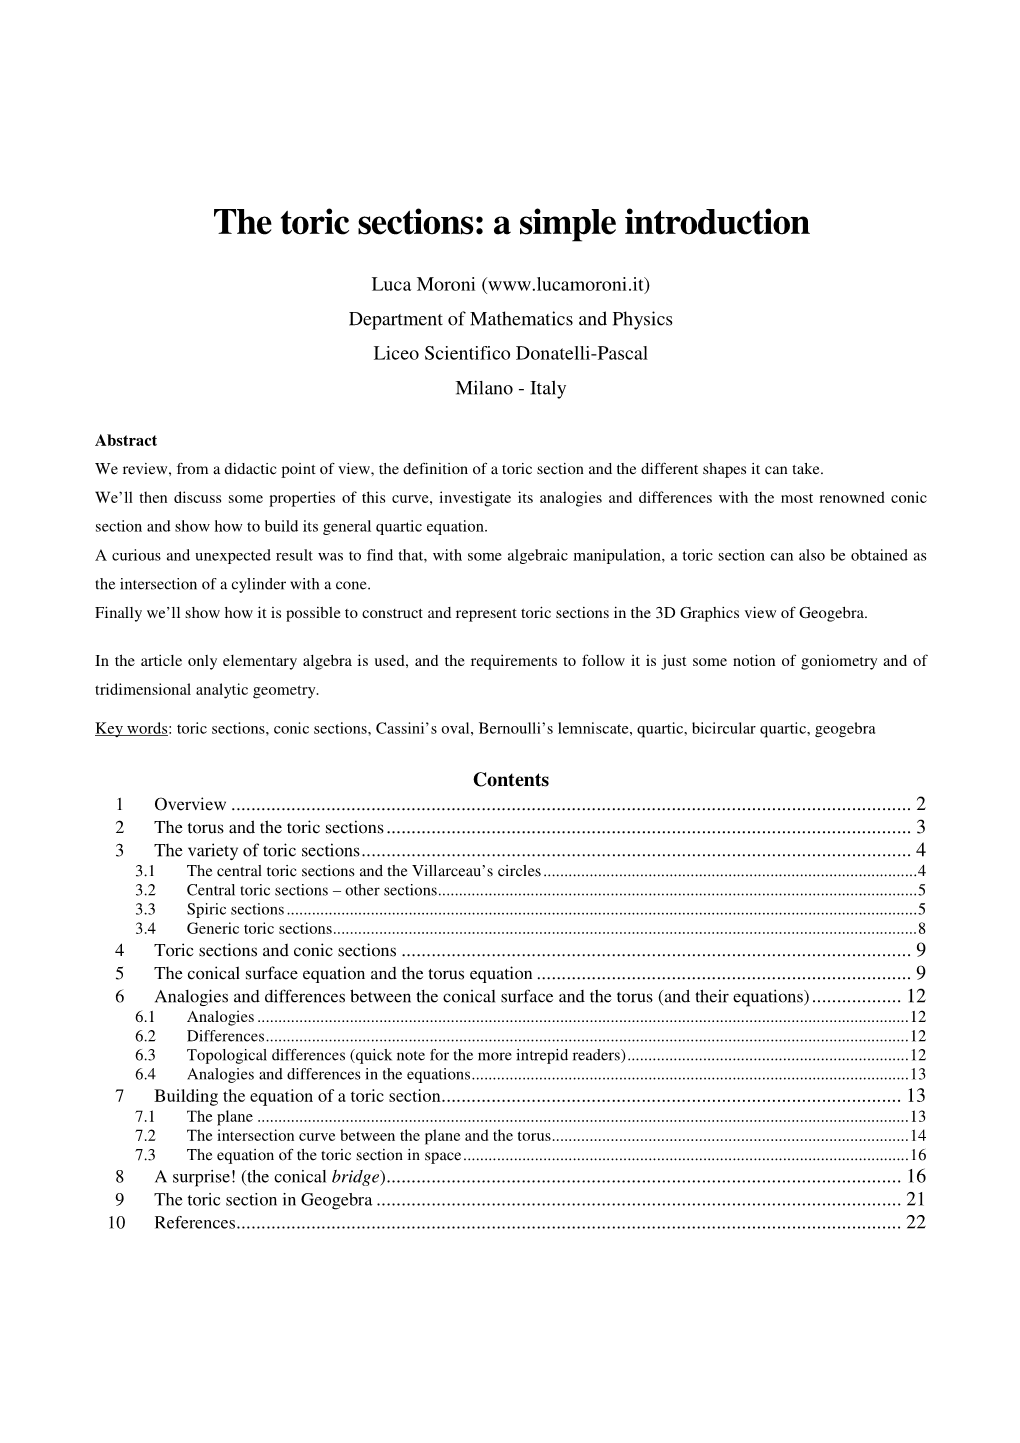 The Toric Sections: a Simple Introduction